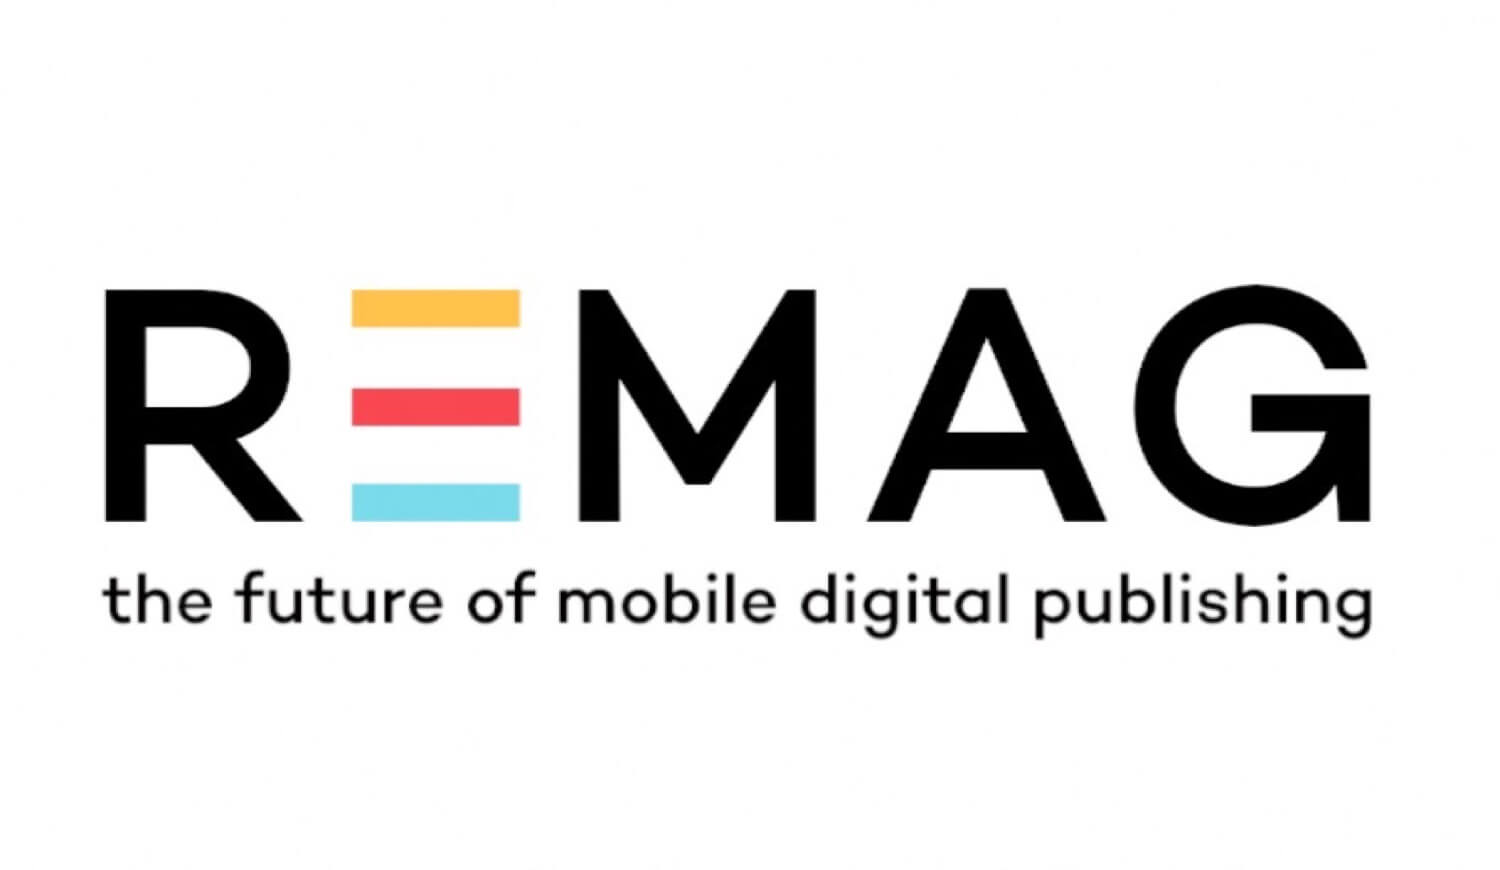 Why I’m starting Remag? To reinvent digital mobile publishing!